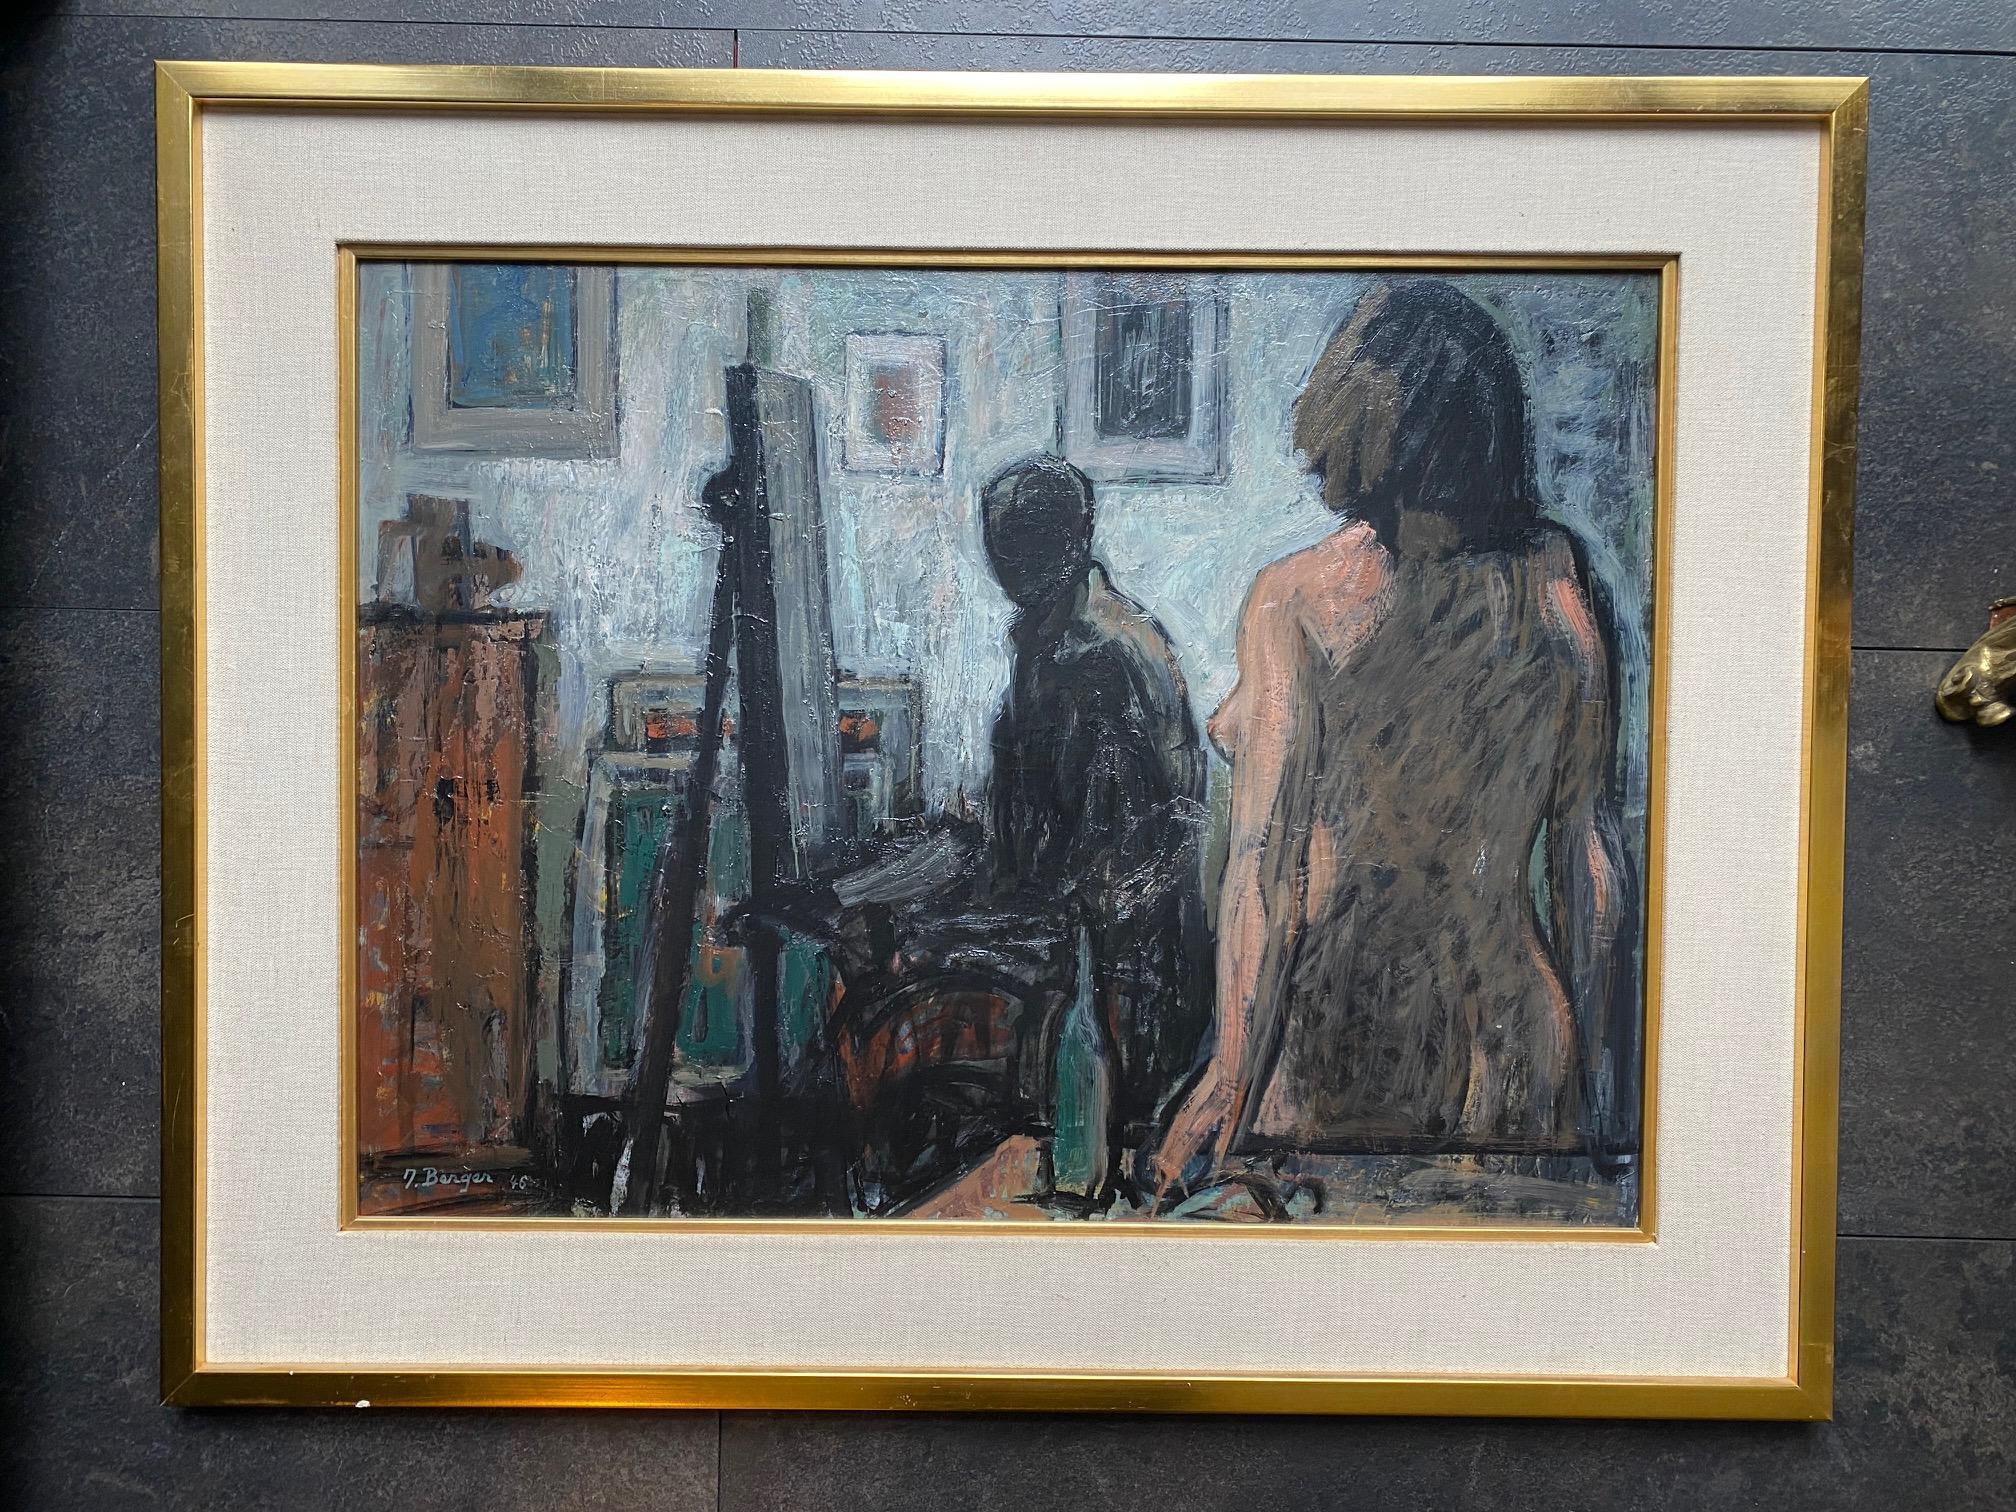 Oil on wood, 
Sold with frame
Total size with frame is 71,5x90,5 cm 
Jacques Berger is a Swiss artist born in 1902 and died in 1977 